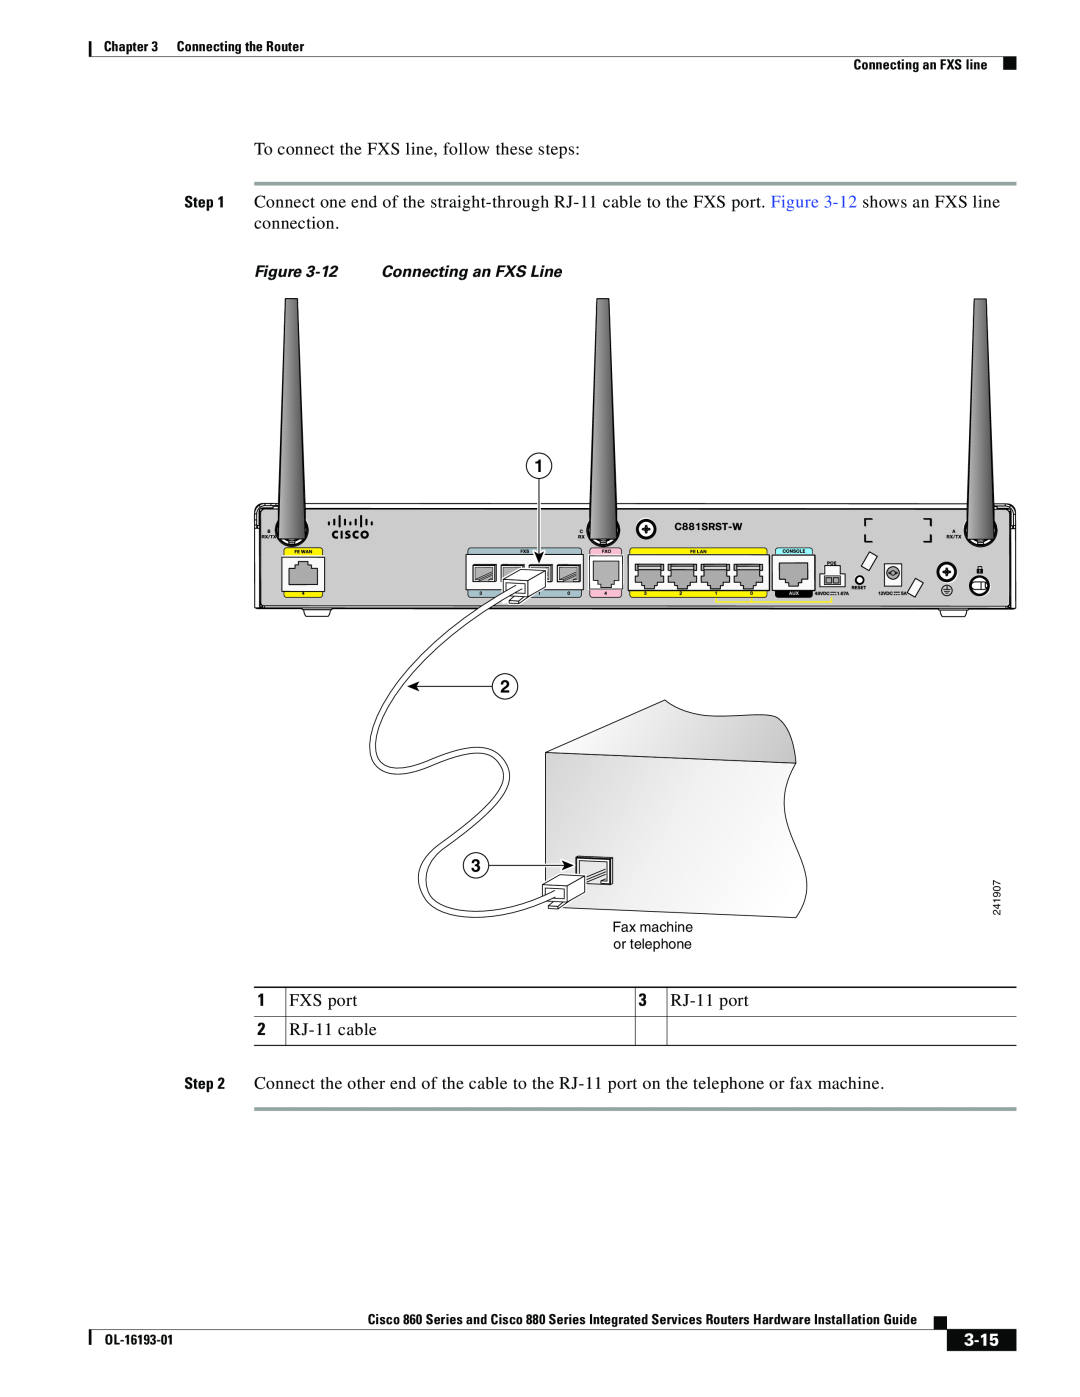 Cisco Systems HIG880, C892FSPK9, 861WGNPK9RF, 860 manual 3-15, To connect the FXS line, follow these steps 